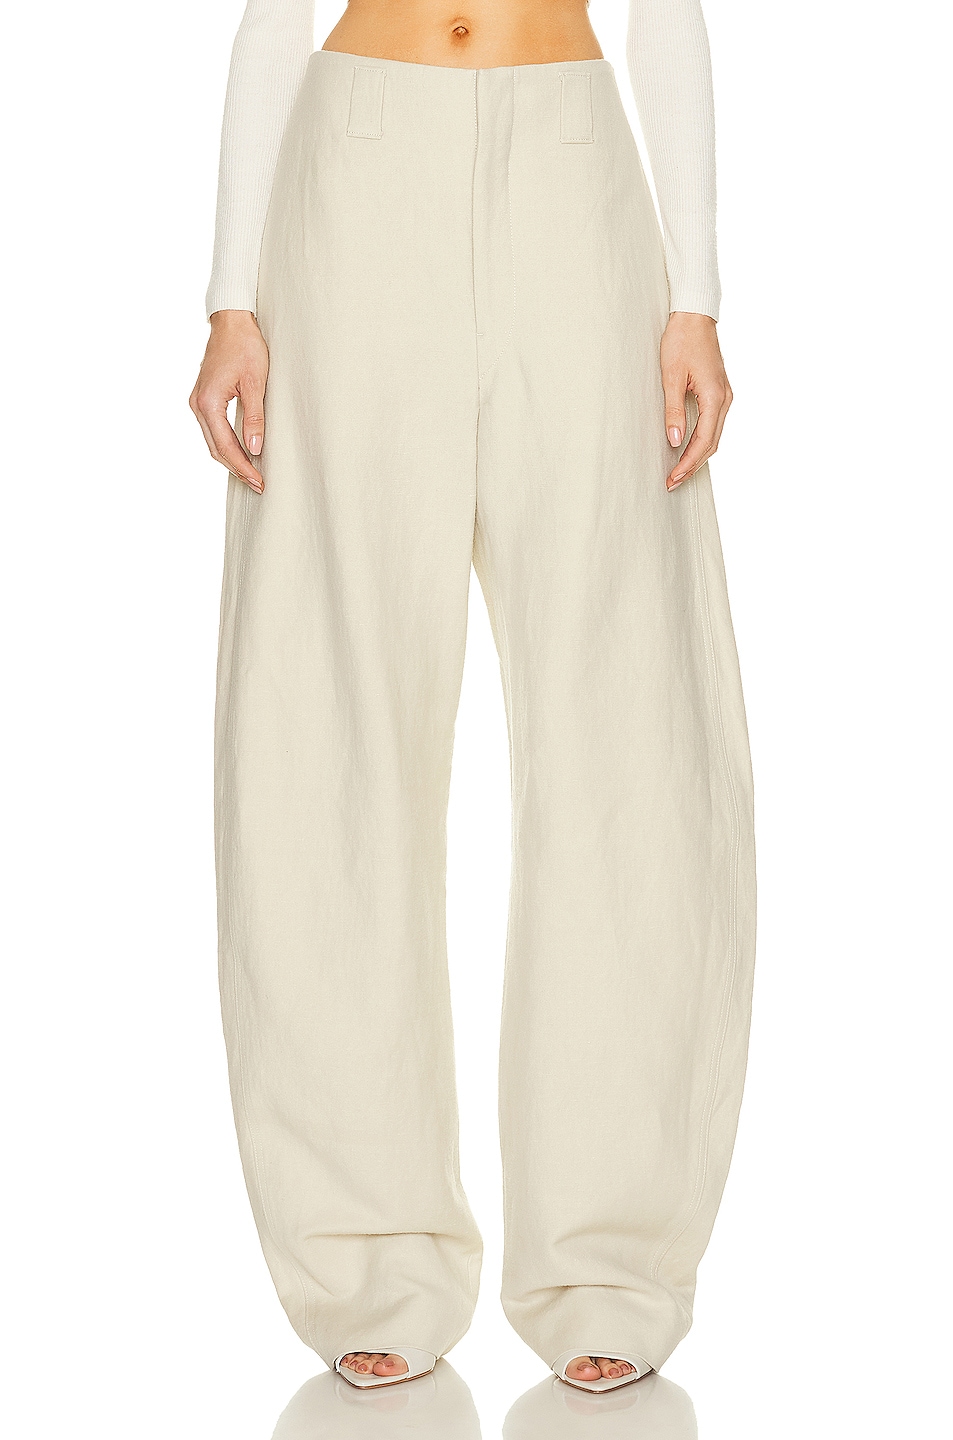 Lemaire Curved Pant in Overcast Grey | FWRD